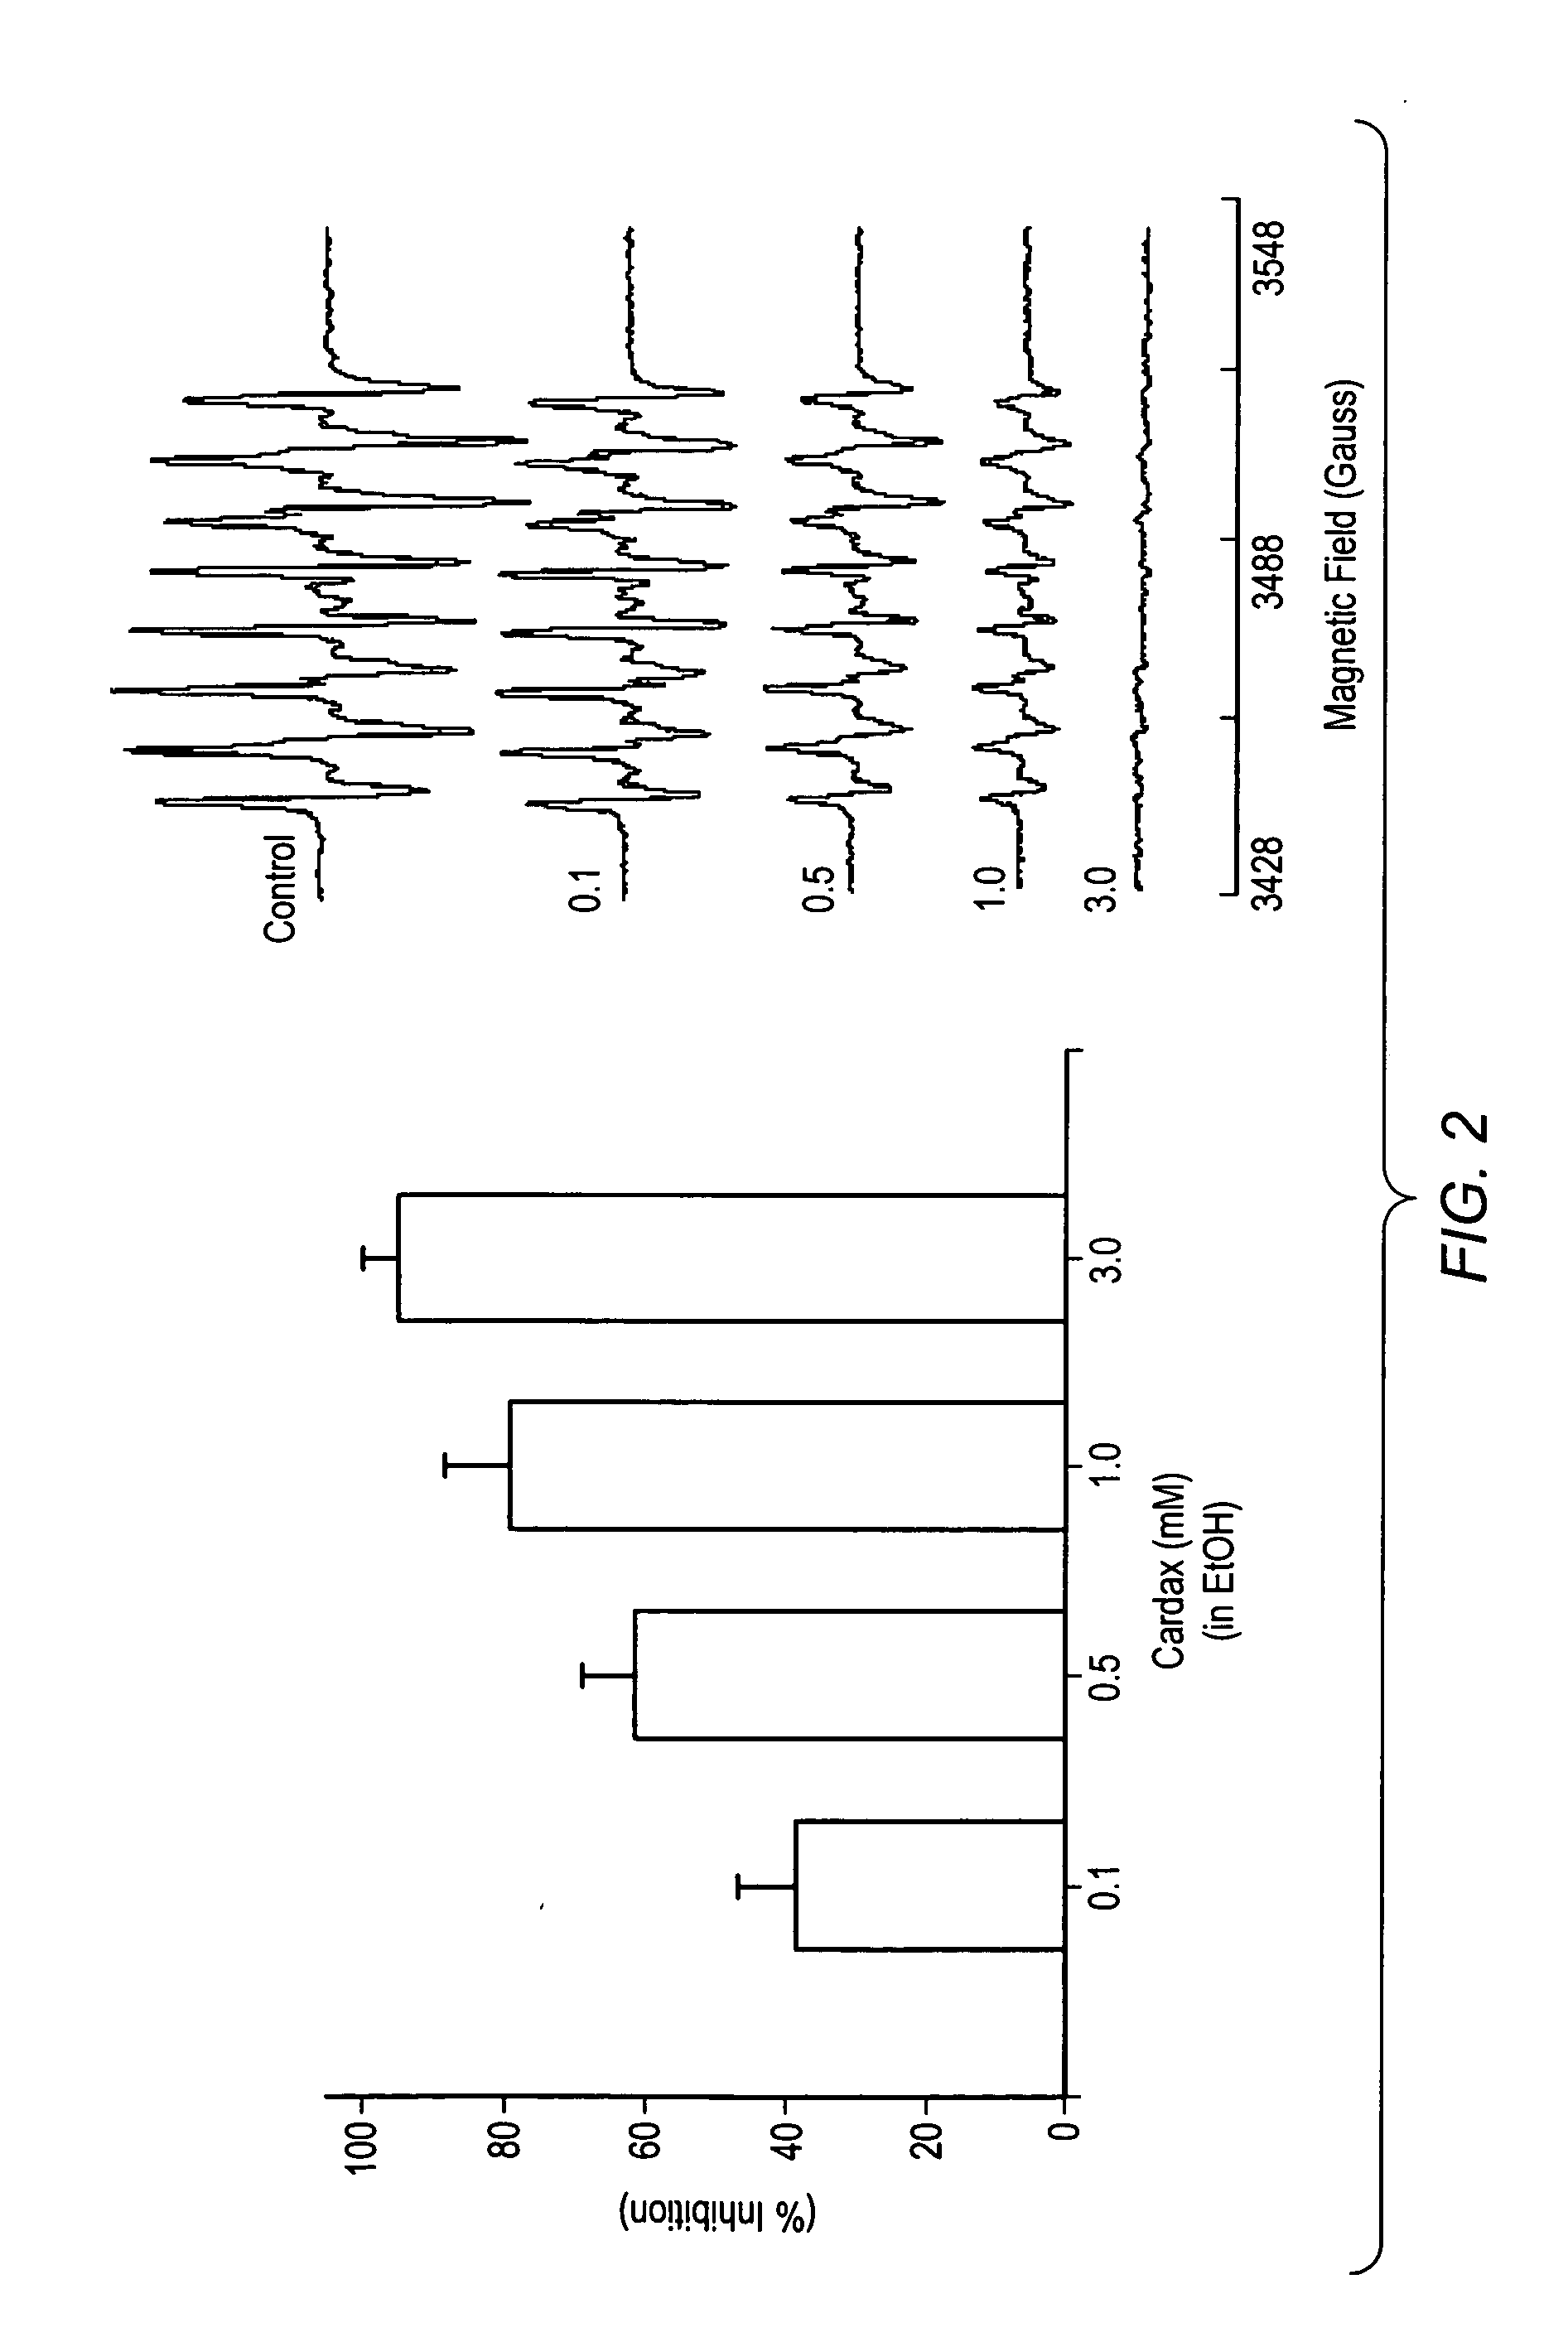 Pharmaceutical compositions including carotenoid ether analogs or derivatives for the inhibition and amelioration of disease